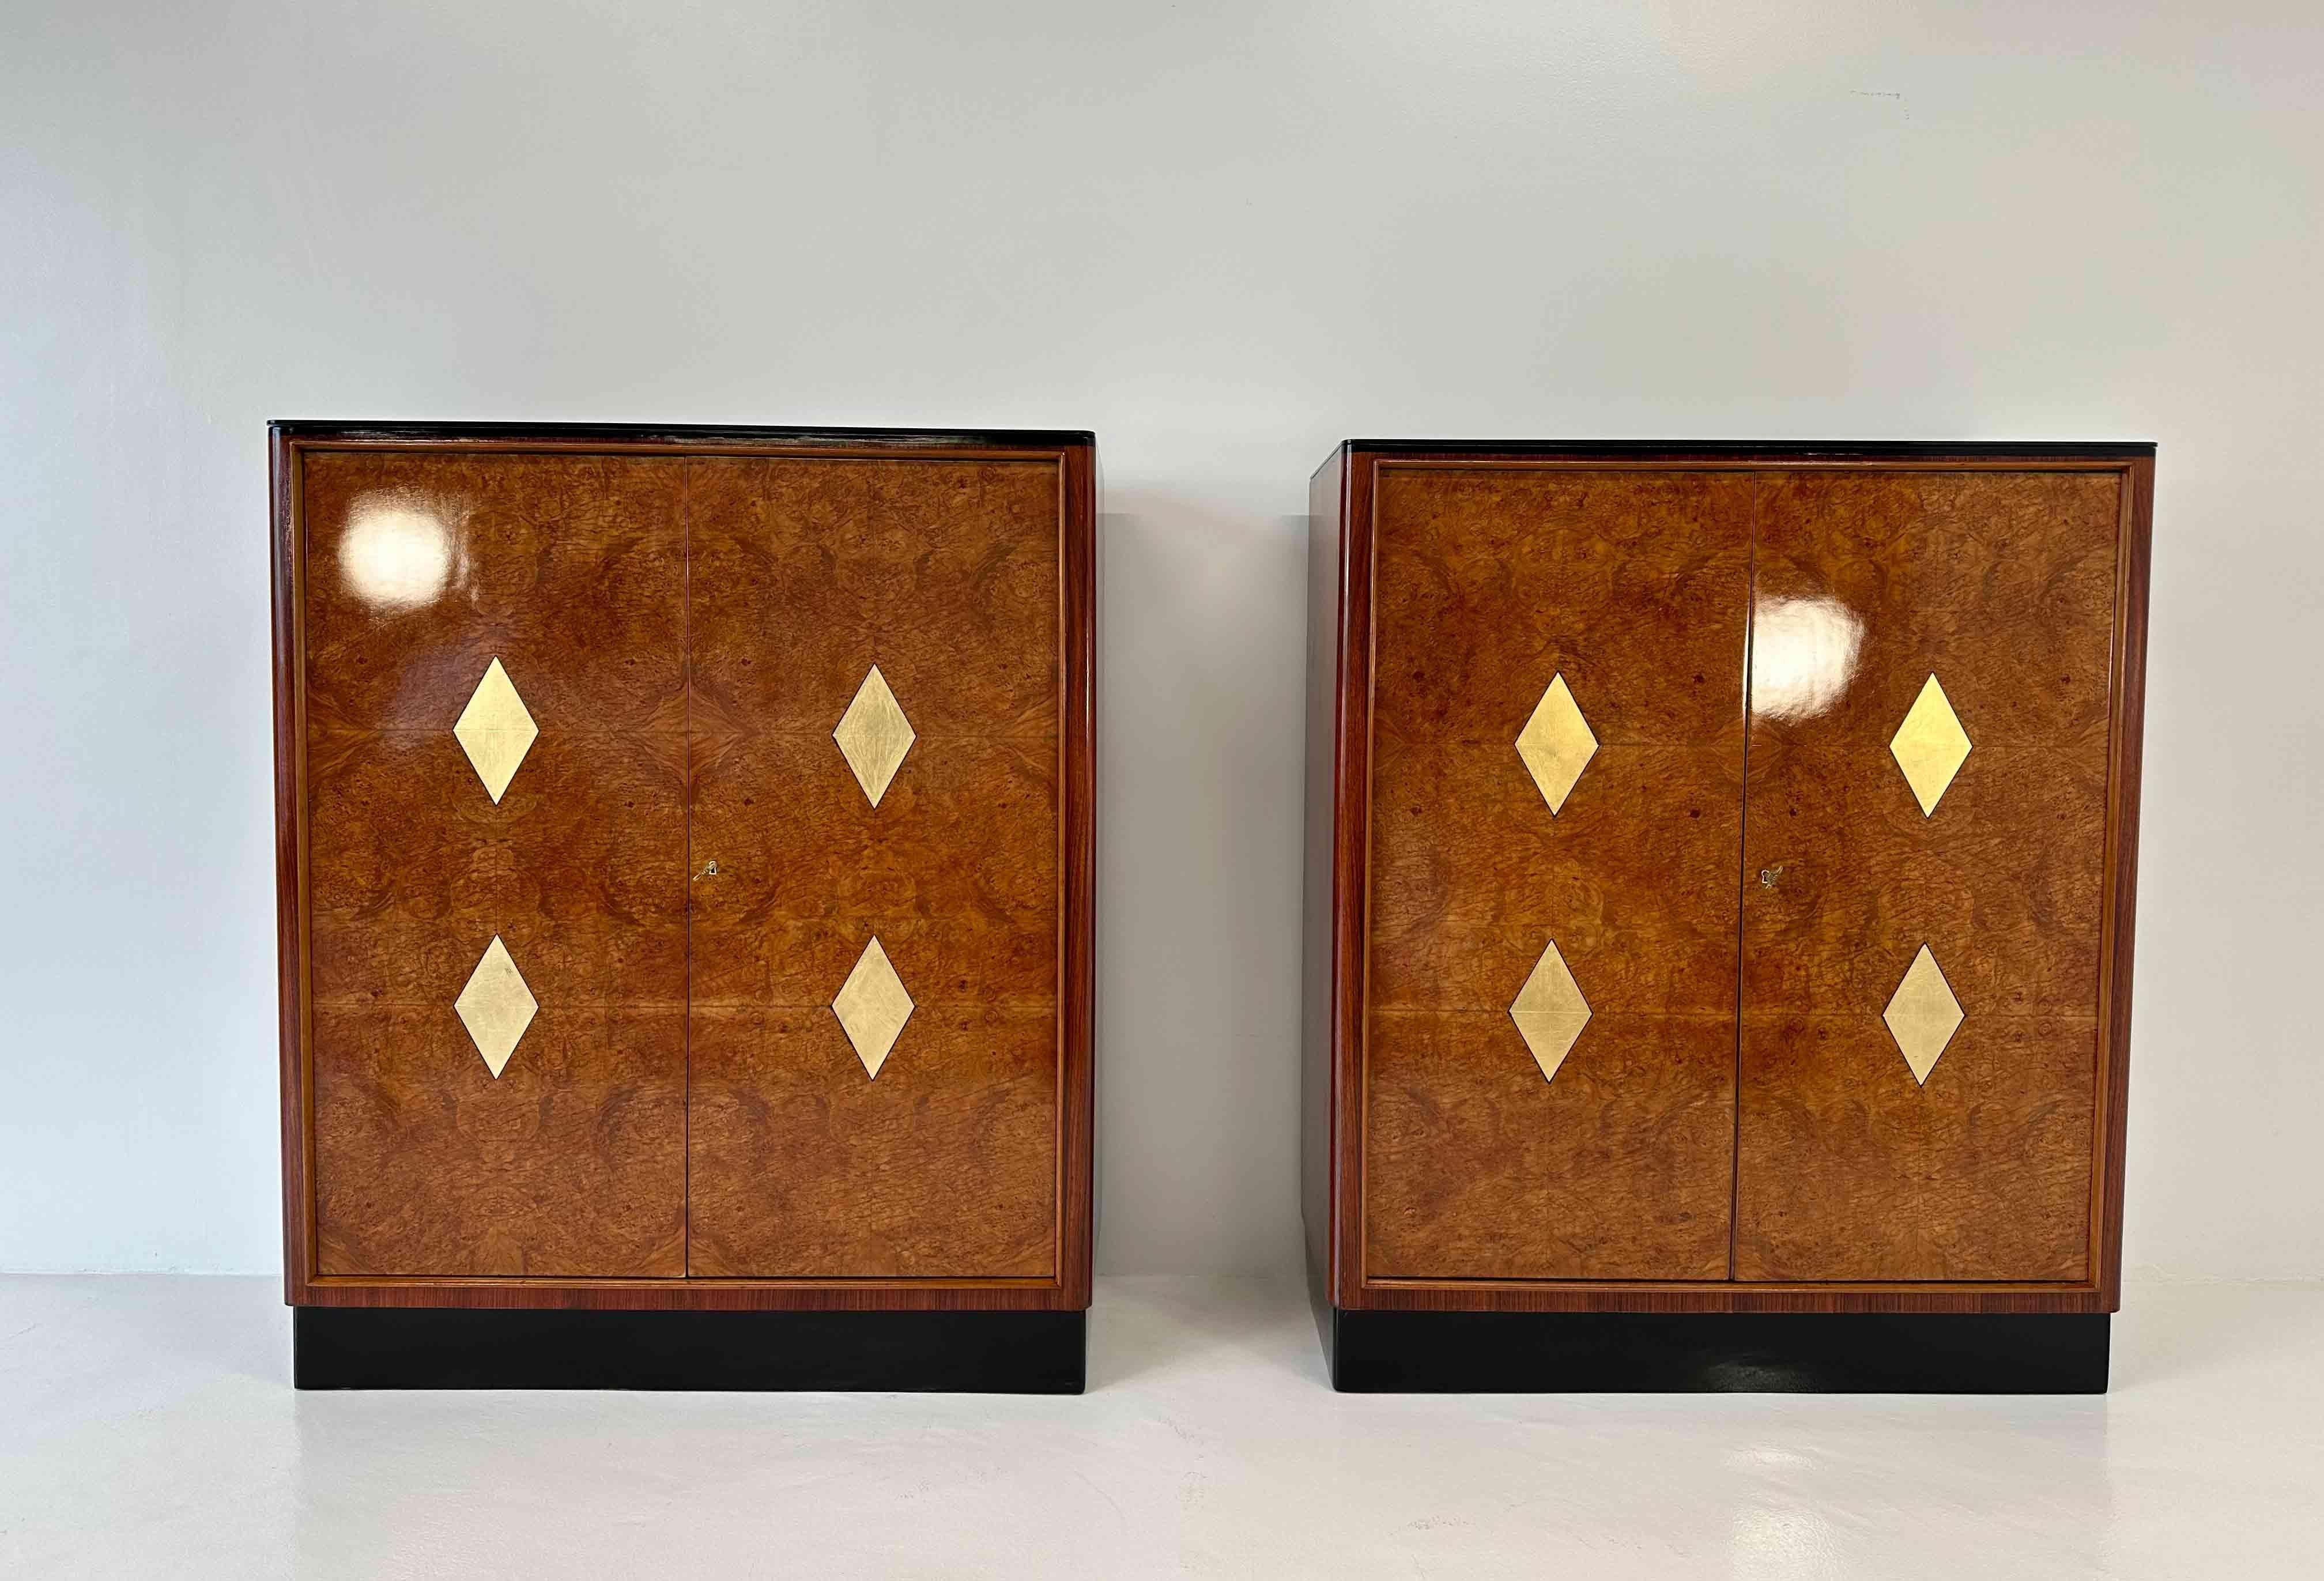 This pair of twin Art Deco cabinet was produced in Italy in the 1940s. 
The two cabinets are in maple briar, with maple profiles and gold leaf decorations in the front. The base is in black lacquered wood, while the top is a black glass. 
Completely